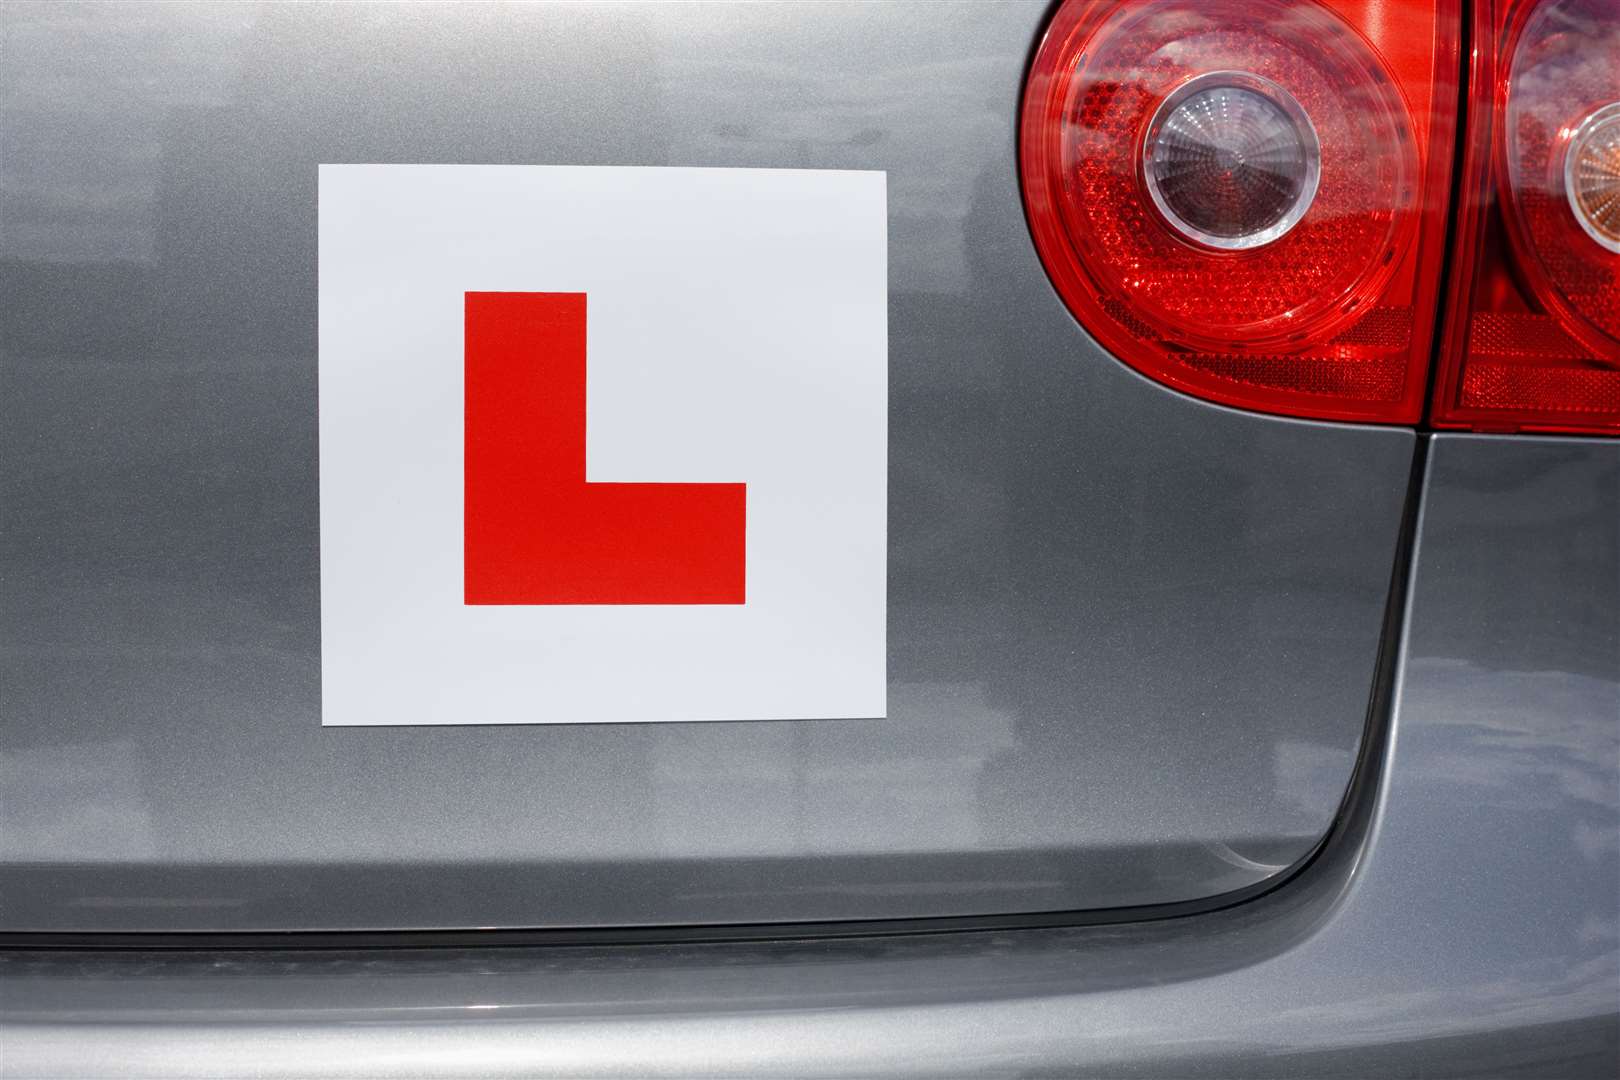 He used a plastic ruler to help learner drivers with clutch control